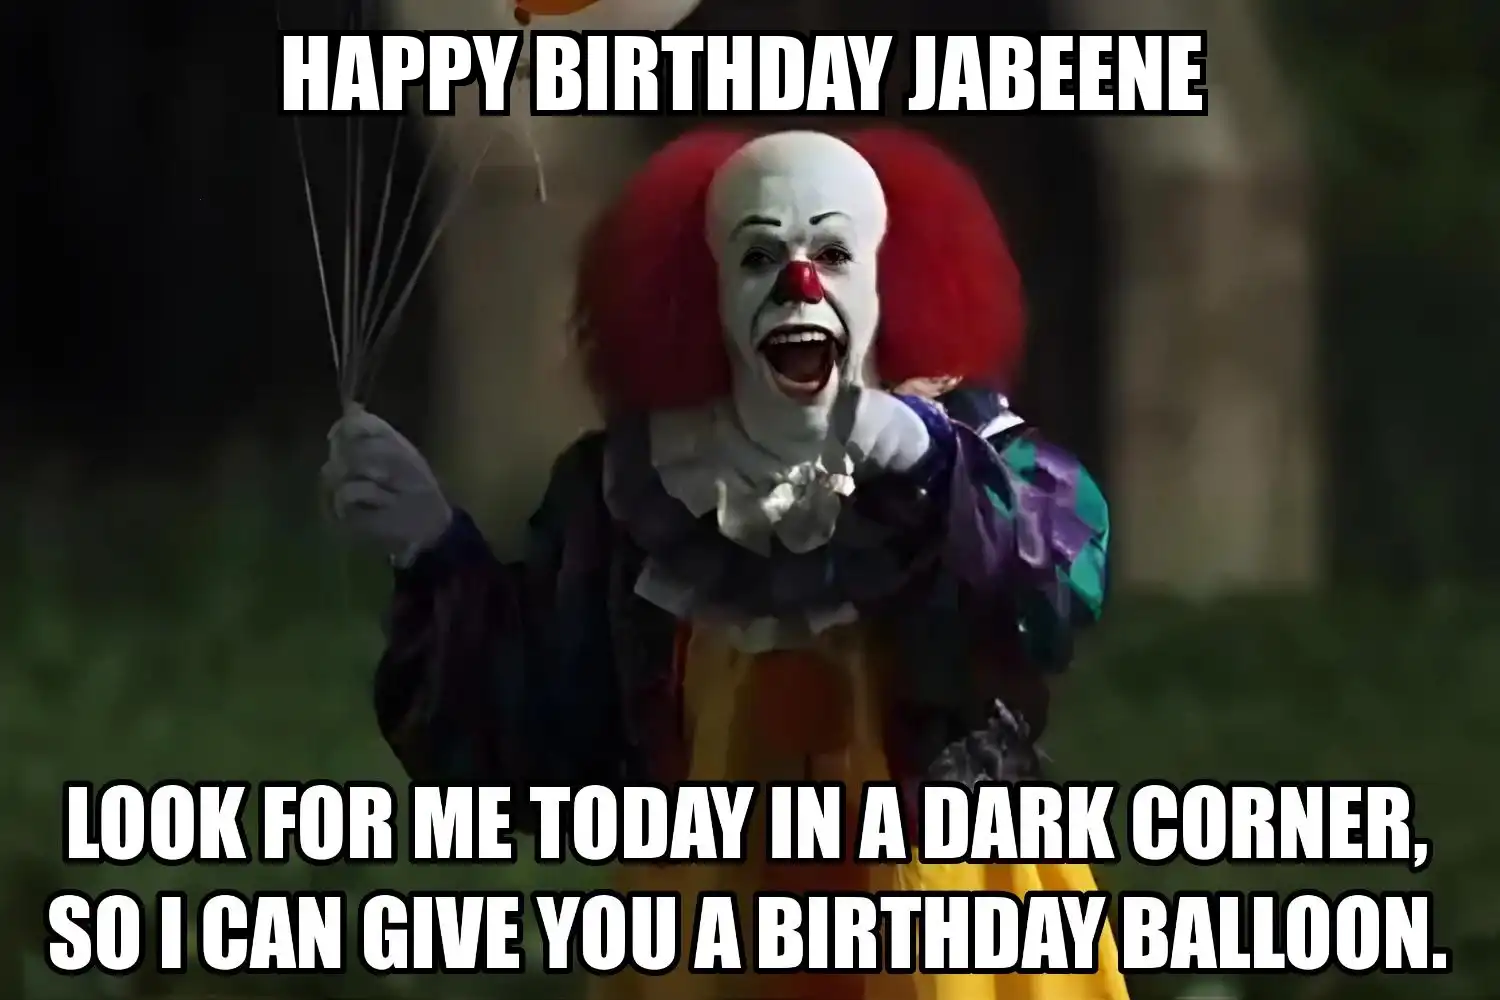 Happy Birthday Jabeene I Can Give You A Balloon Meme